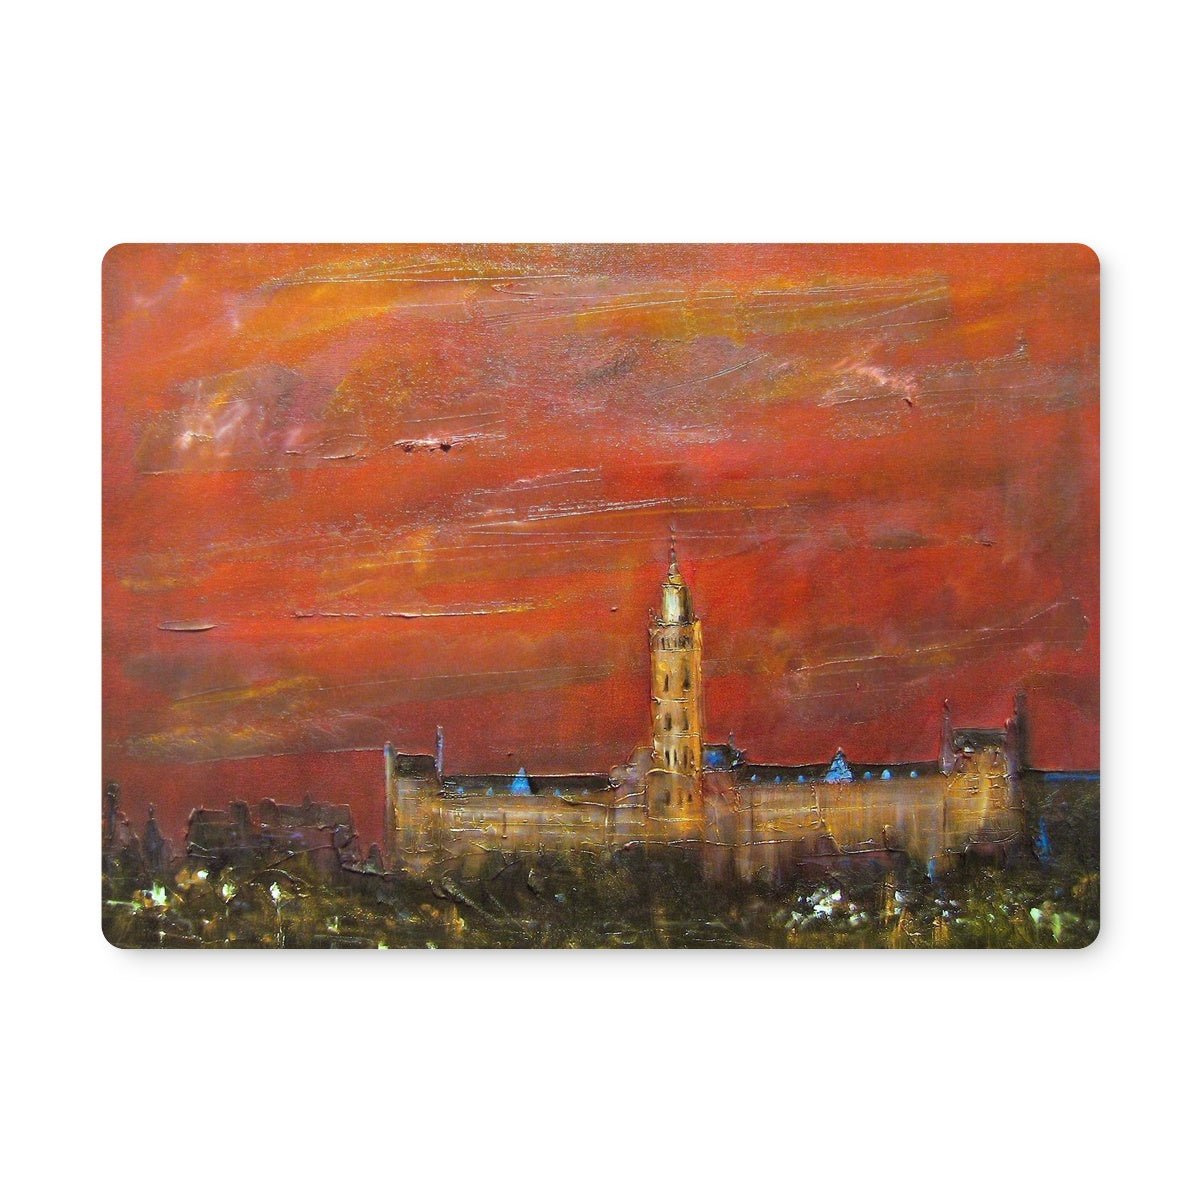 Glasgow University Dusk Art Gifts Placemat-Placemats-Edinburgh & Glasgow Art Gallery-4 Placemats-Paintings, Prints, Homeware, Art Gifts From Scotland By Scottish Artist Kevin Hunter